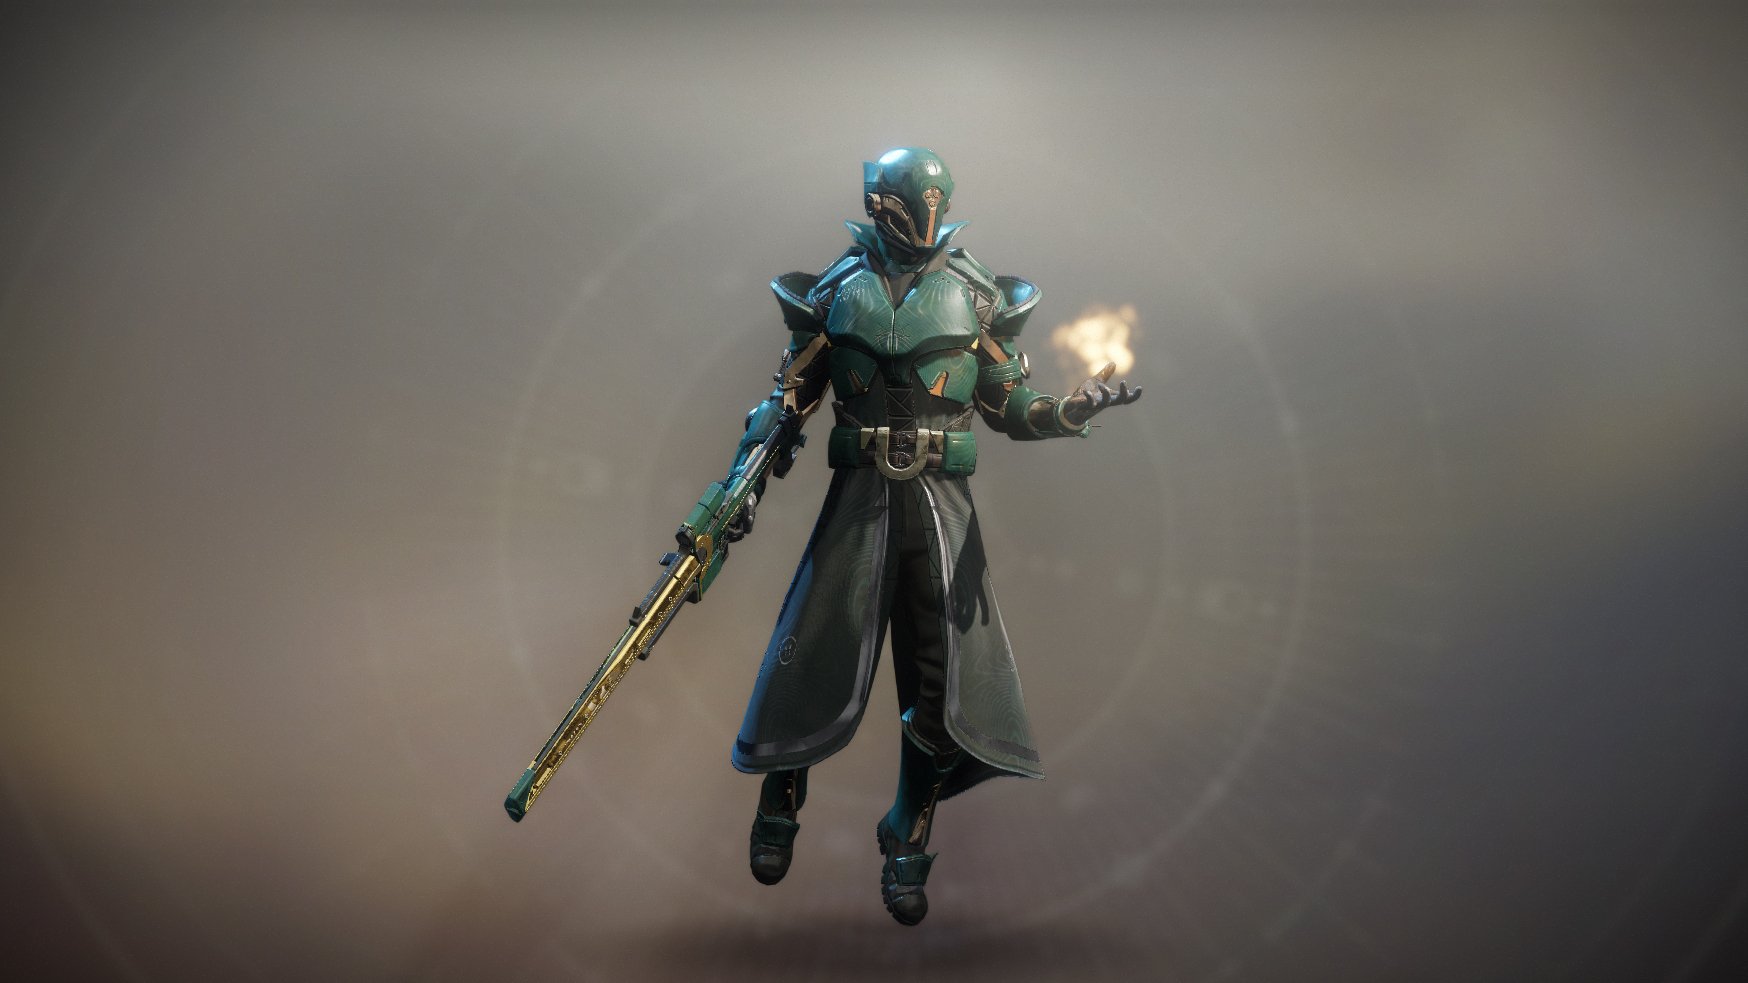 where to buy shaders in destiny 2